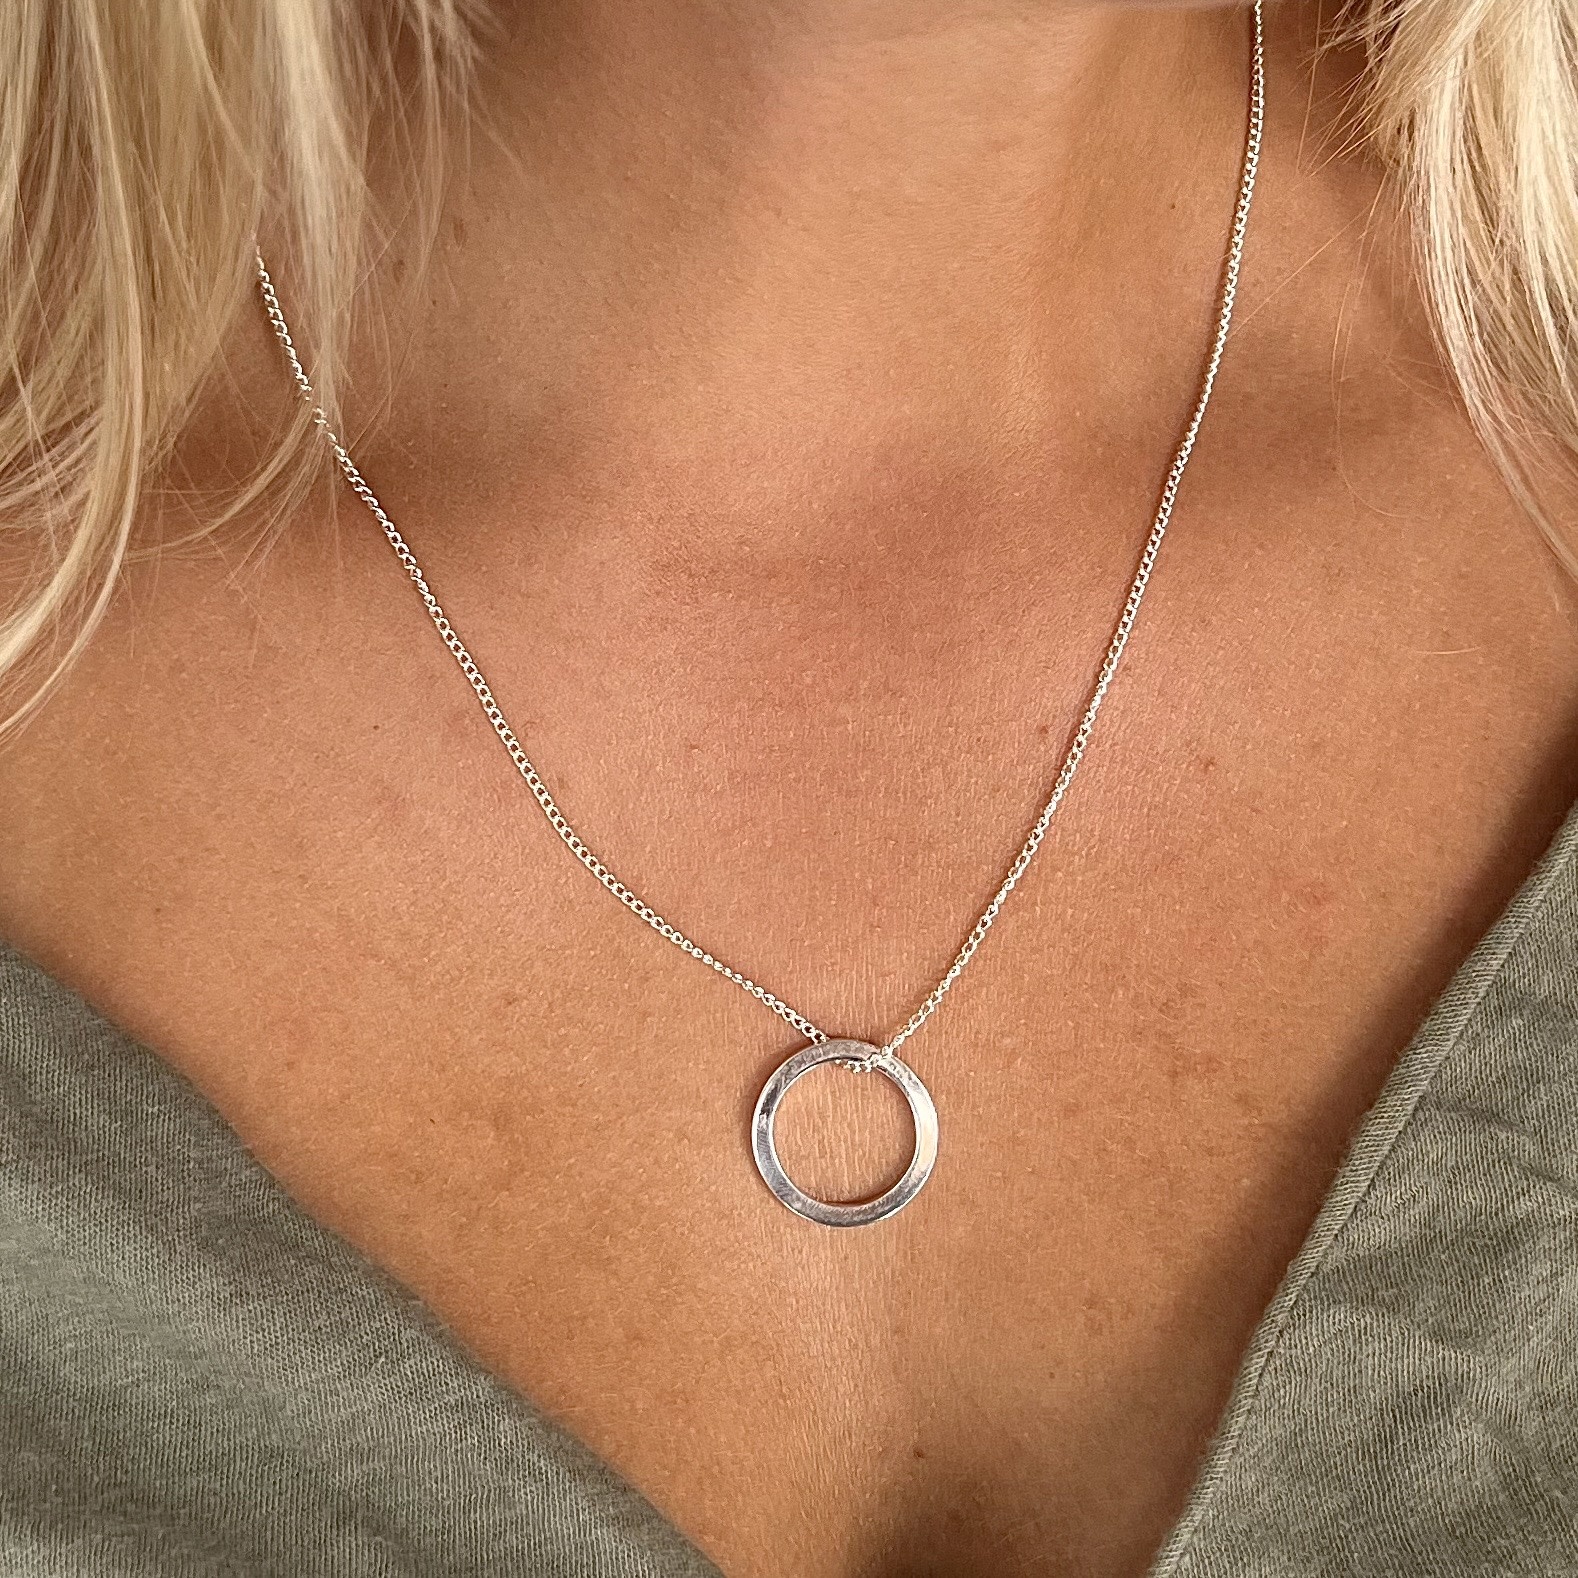 Here's everything about ring necklace